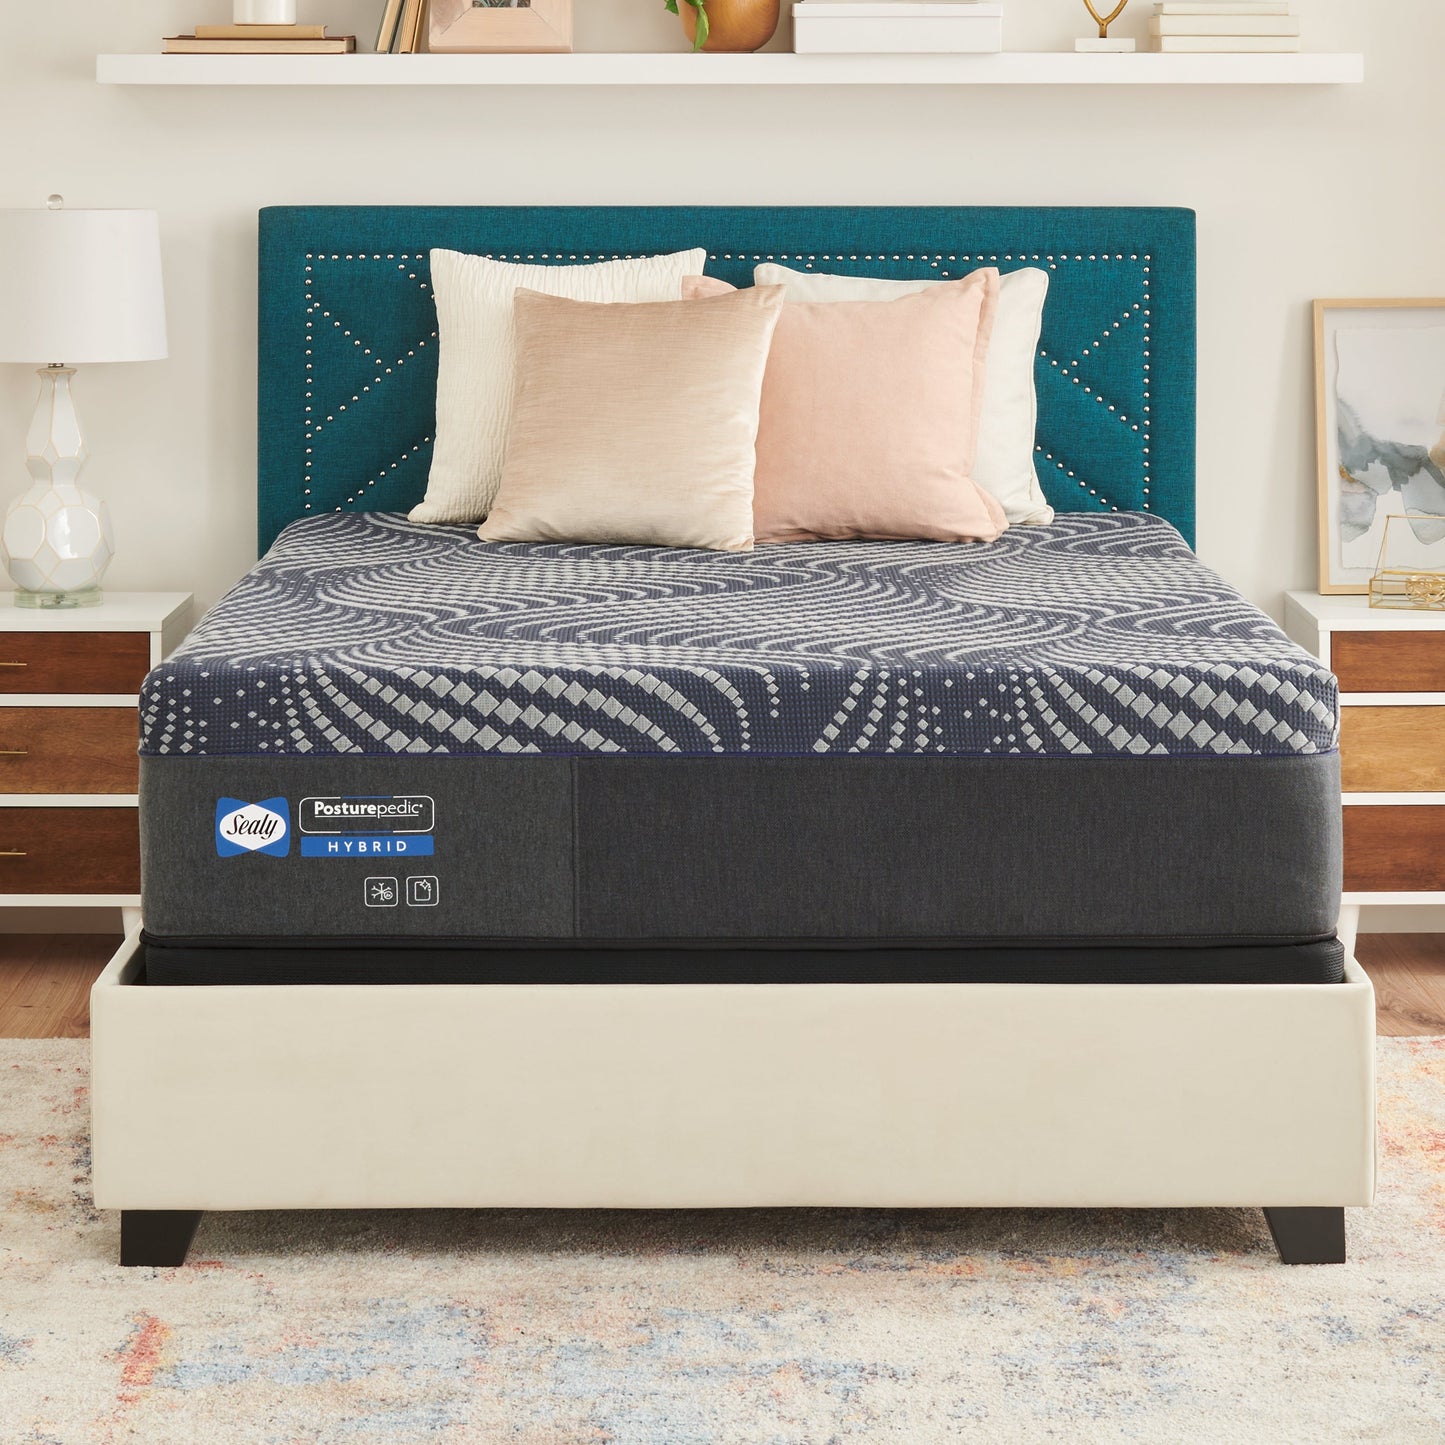 Sealy Brenham Soft Mattress On Bed Frame In Bedroom Front View